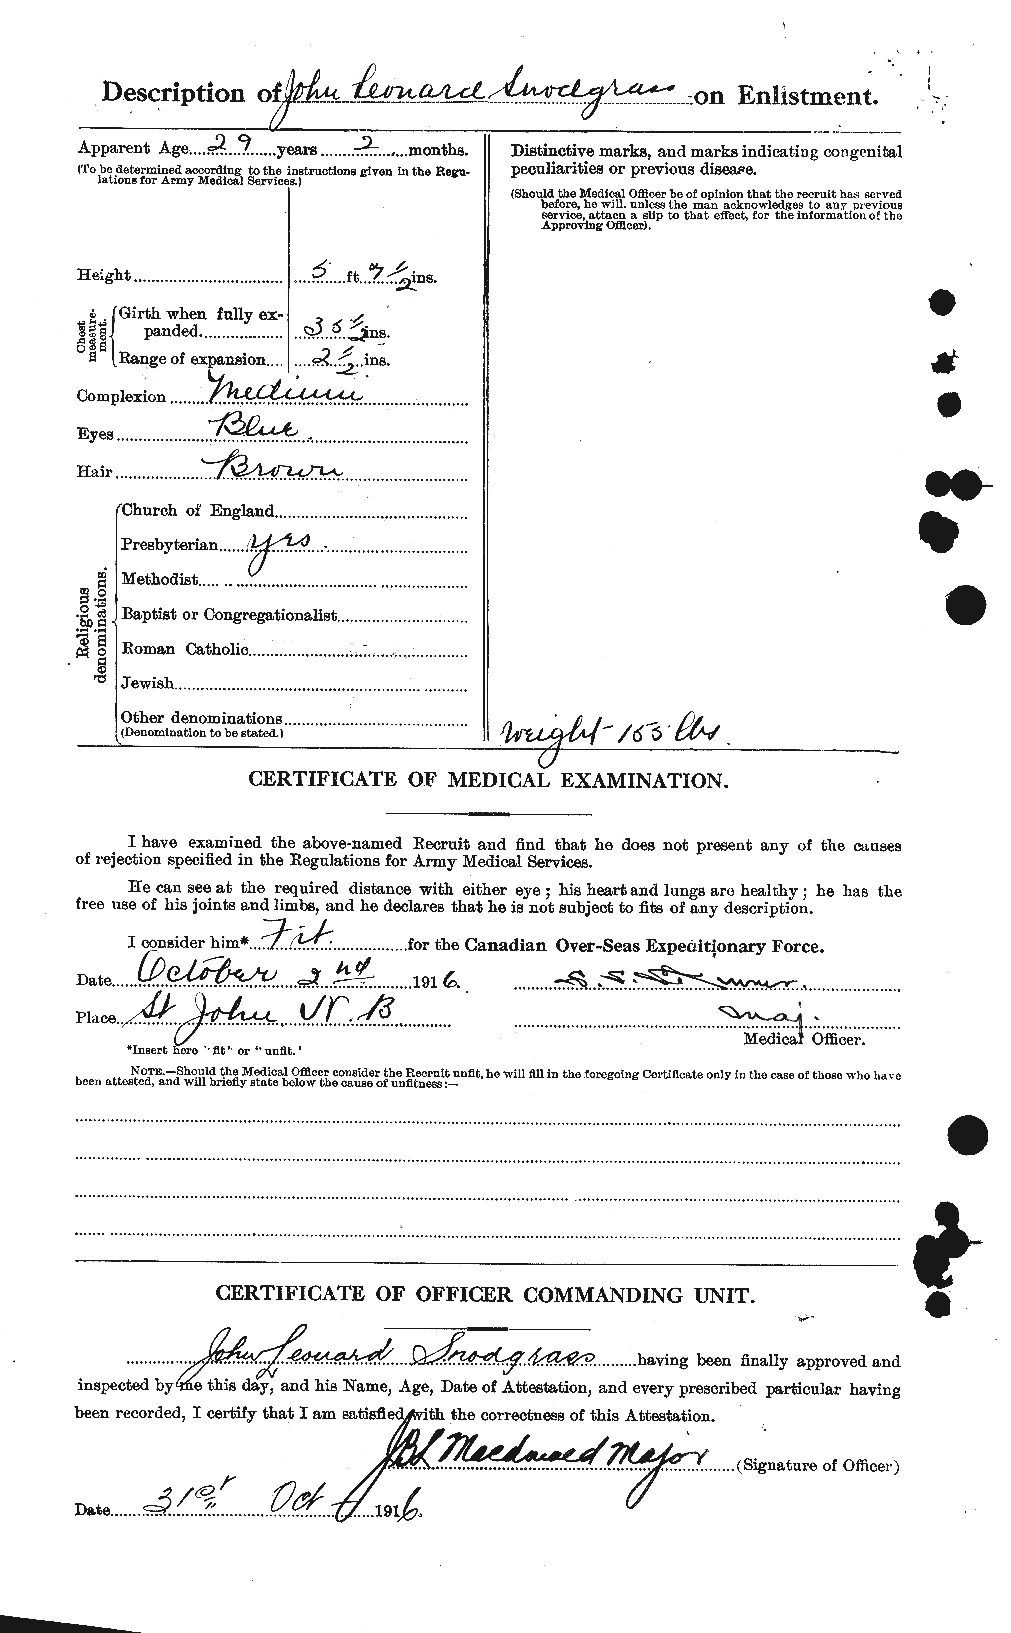 Personnel Records of the First World War - CEF 109438b